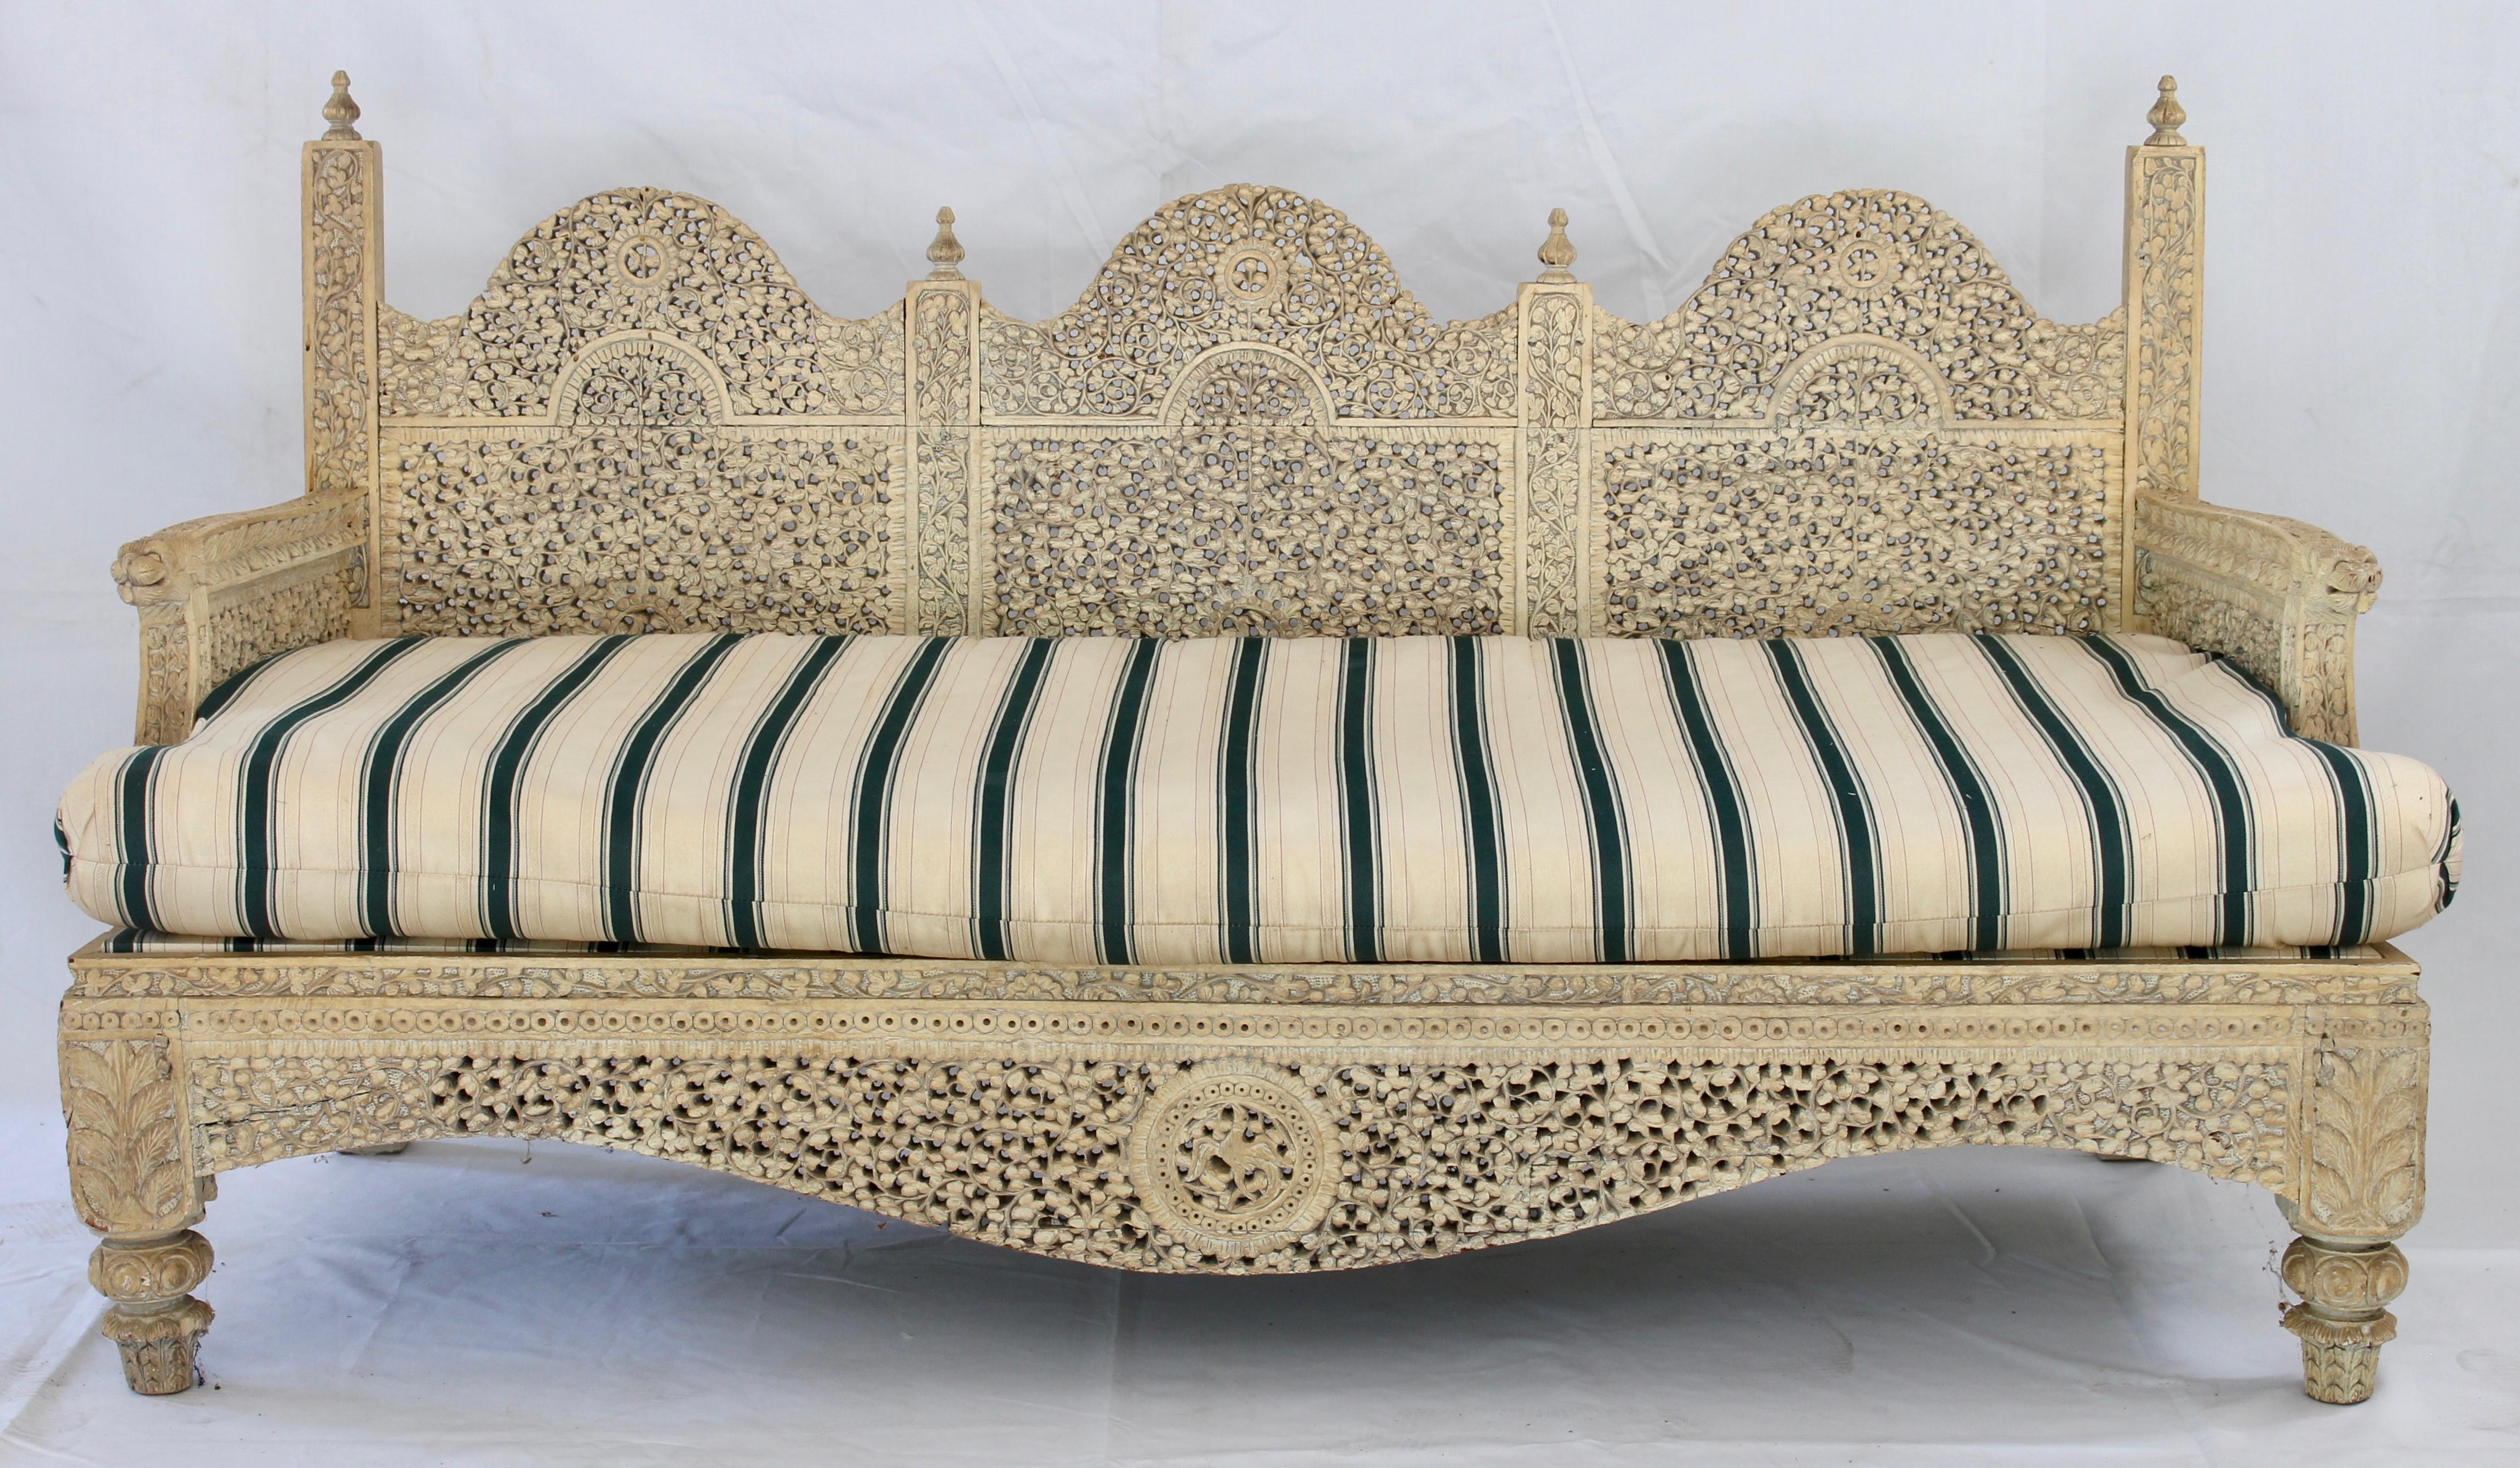 An exceptional heavily carved Indian sofa or settee with original cream colored paint finish and likely later upholstered cushion in green and ivory striped cotton fabric.